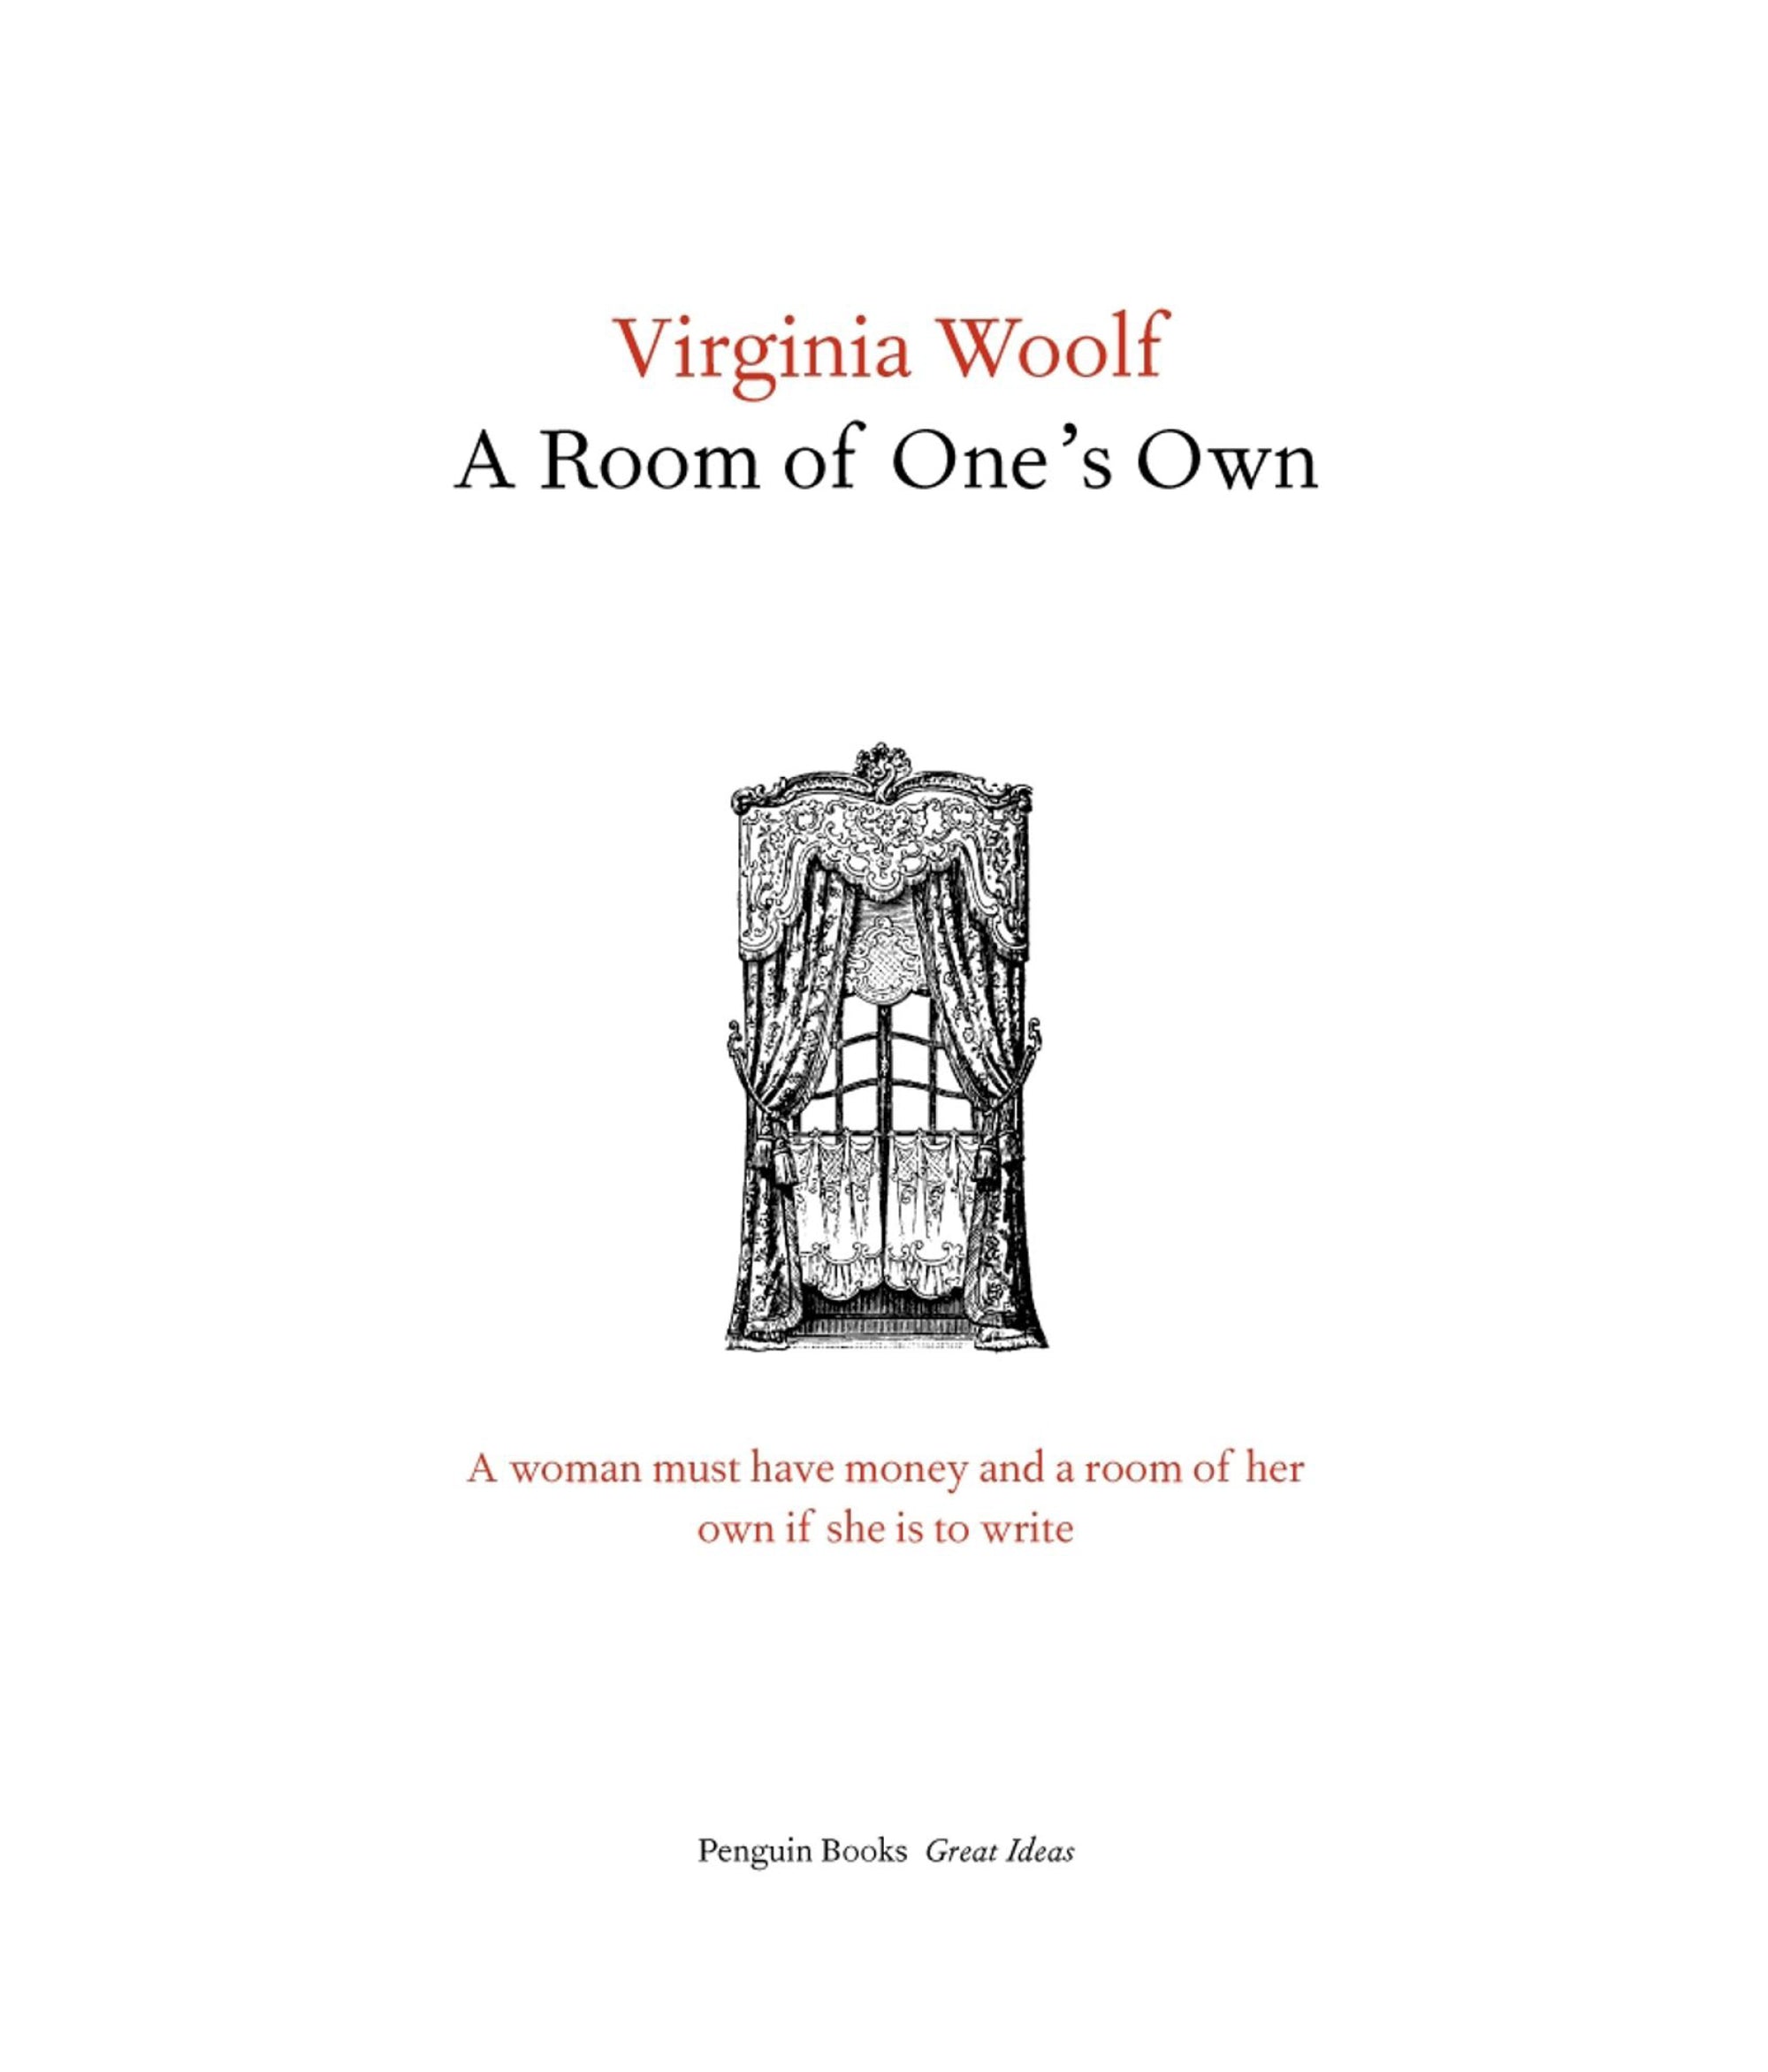 a room of one's own by Virginia Woolf